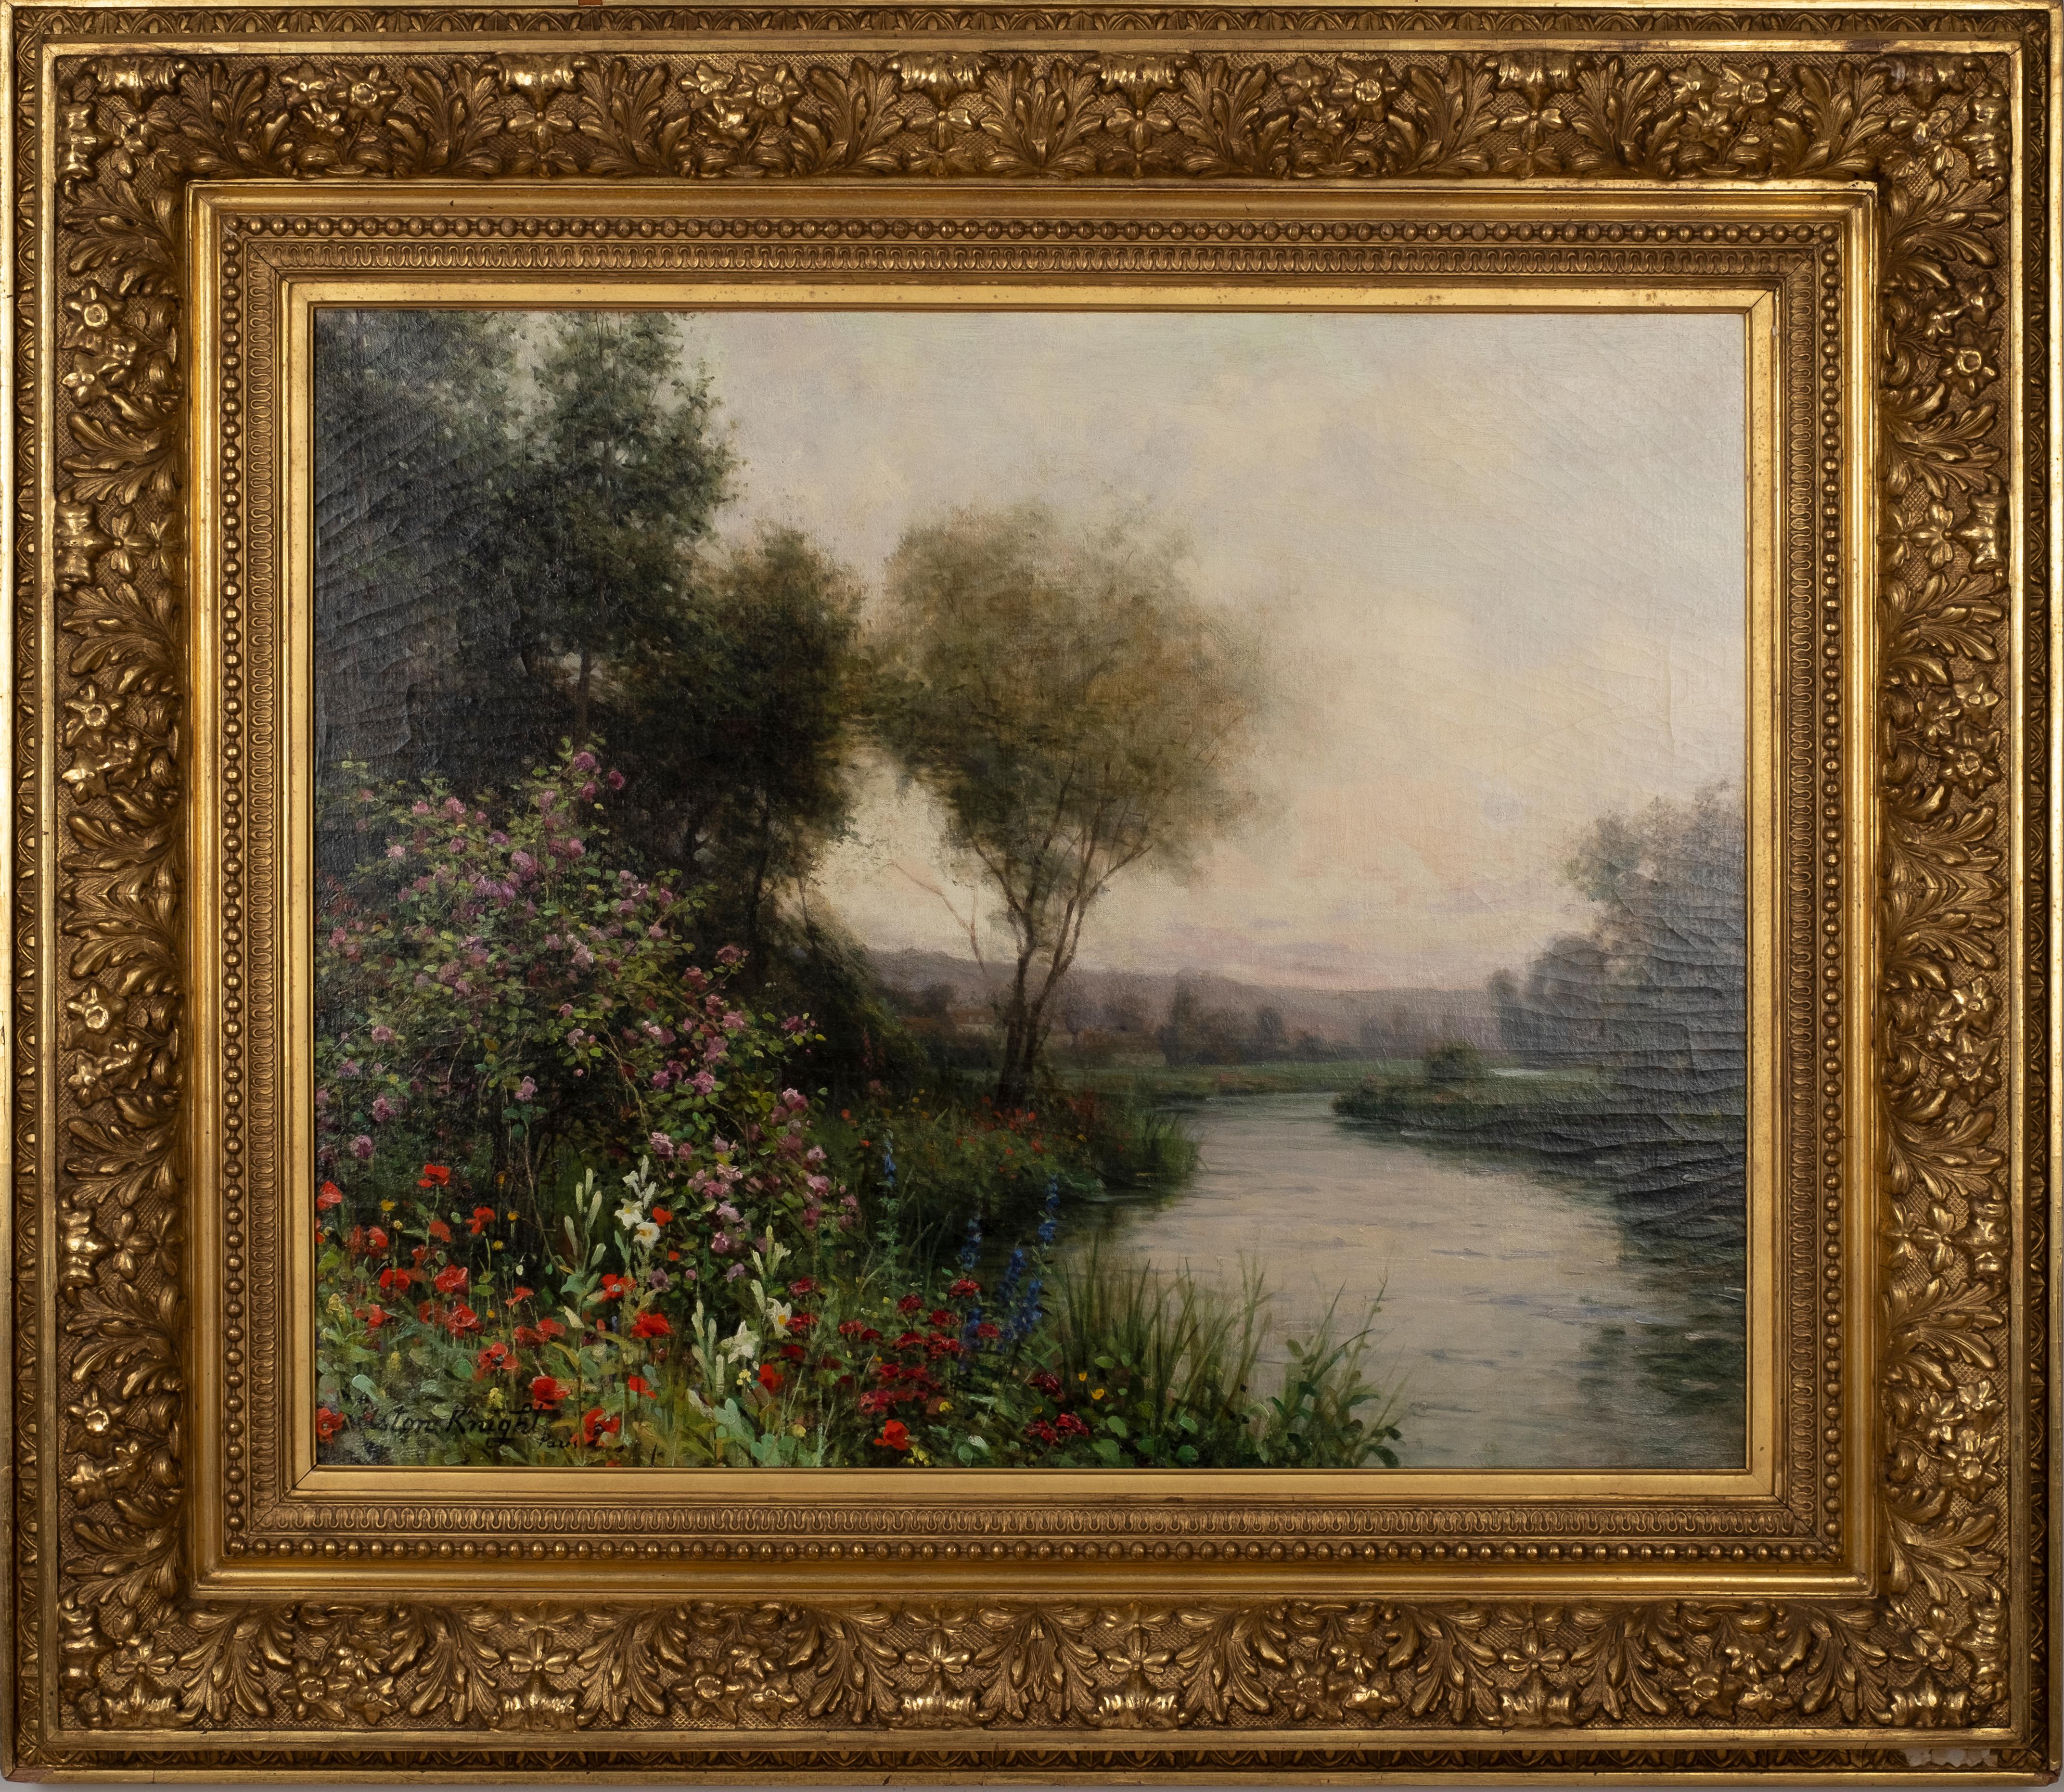 Louis Aston Knight Landscape Painting - Flowers on the Riverbank landscape, France